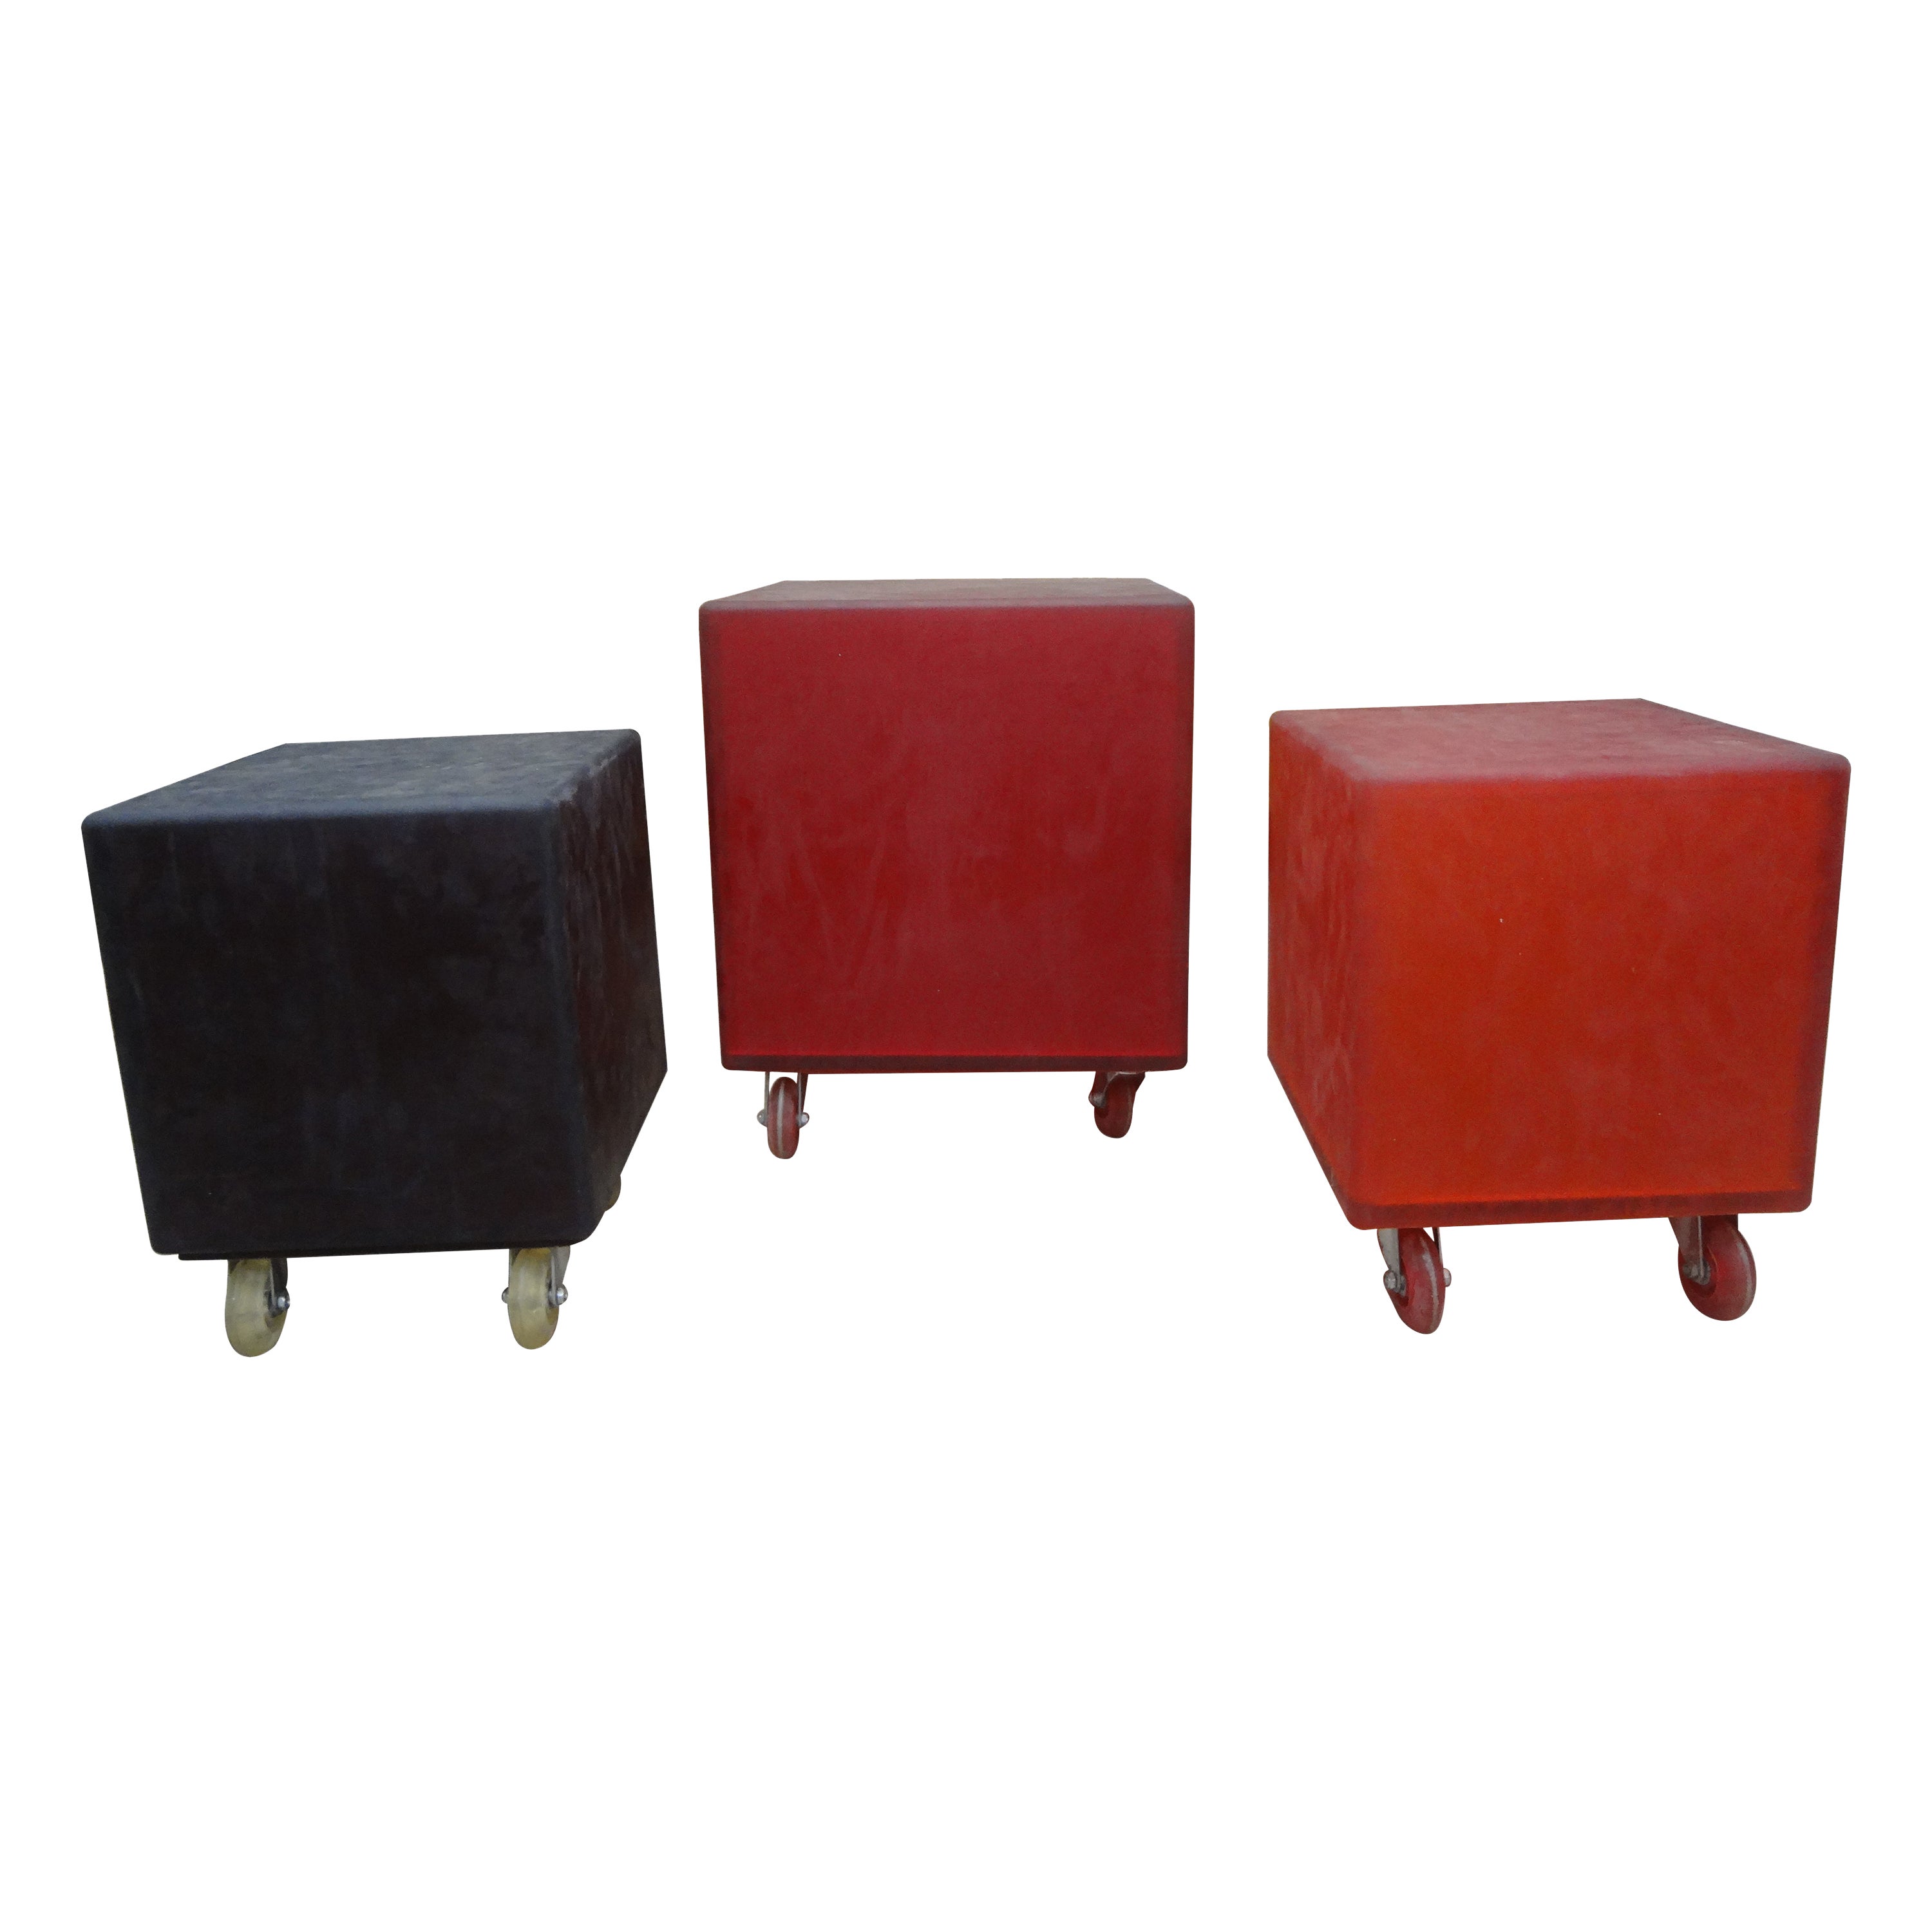 Set Of 3 Mid Century Modern Rubber Cube Tables Or Ottomans